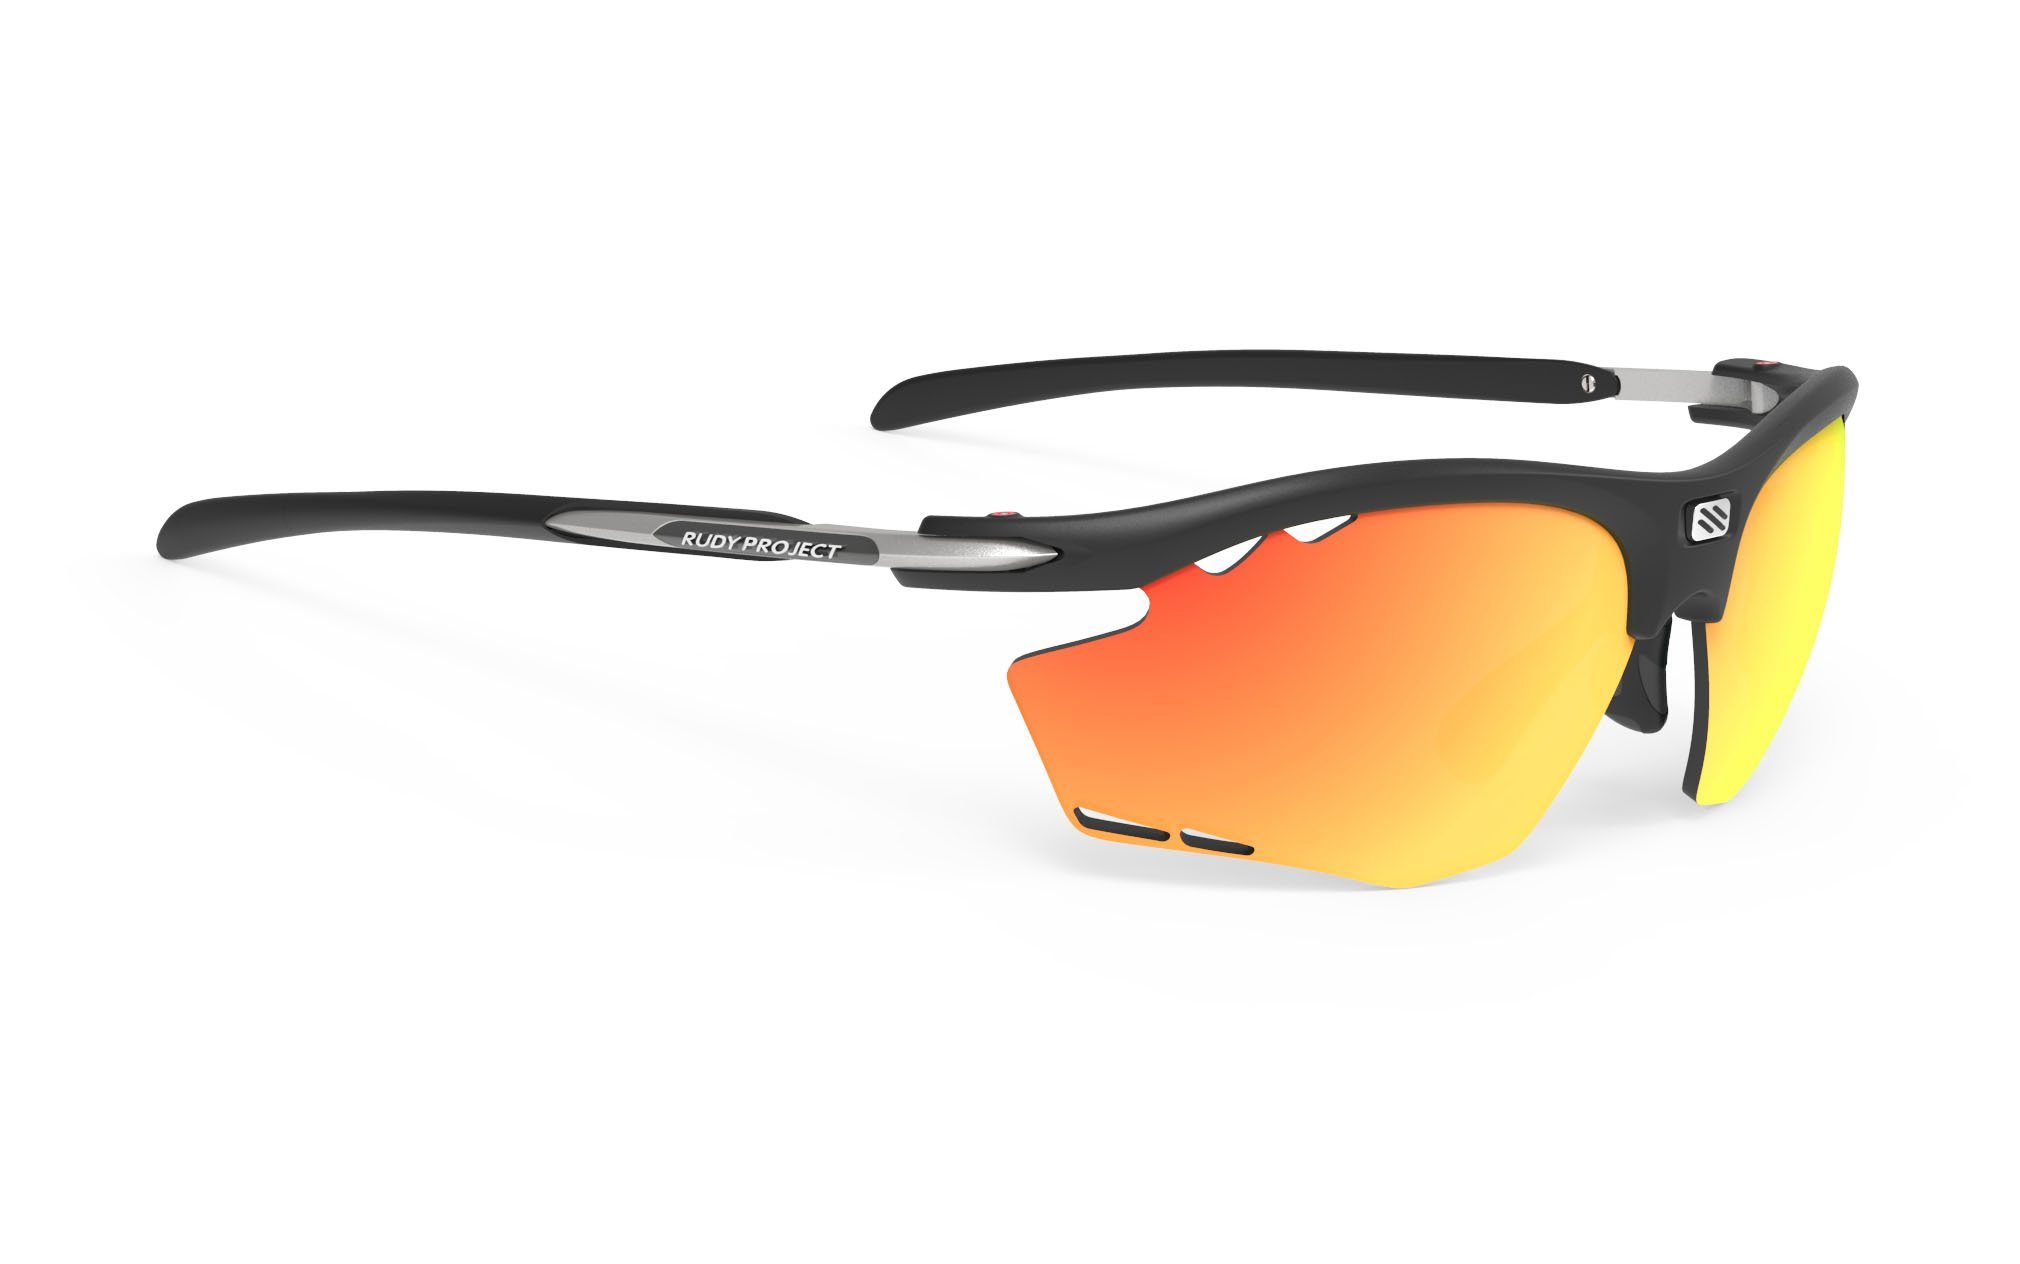 Rudy Project Running Sunglasses Receive Top Awards